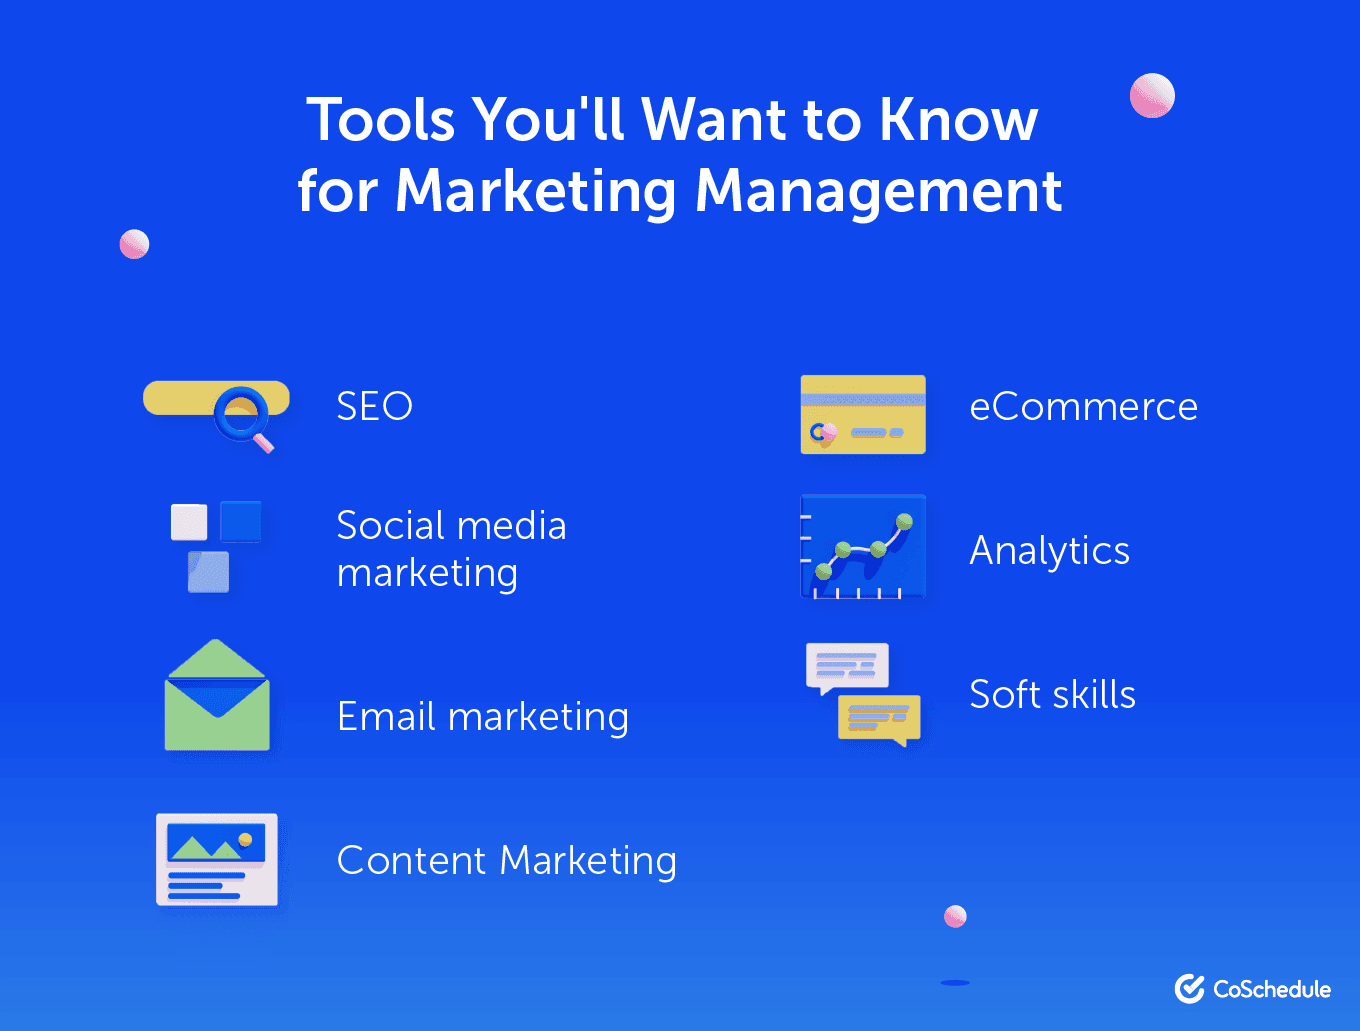 Tools for marketing management